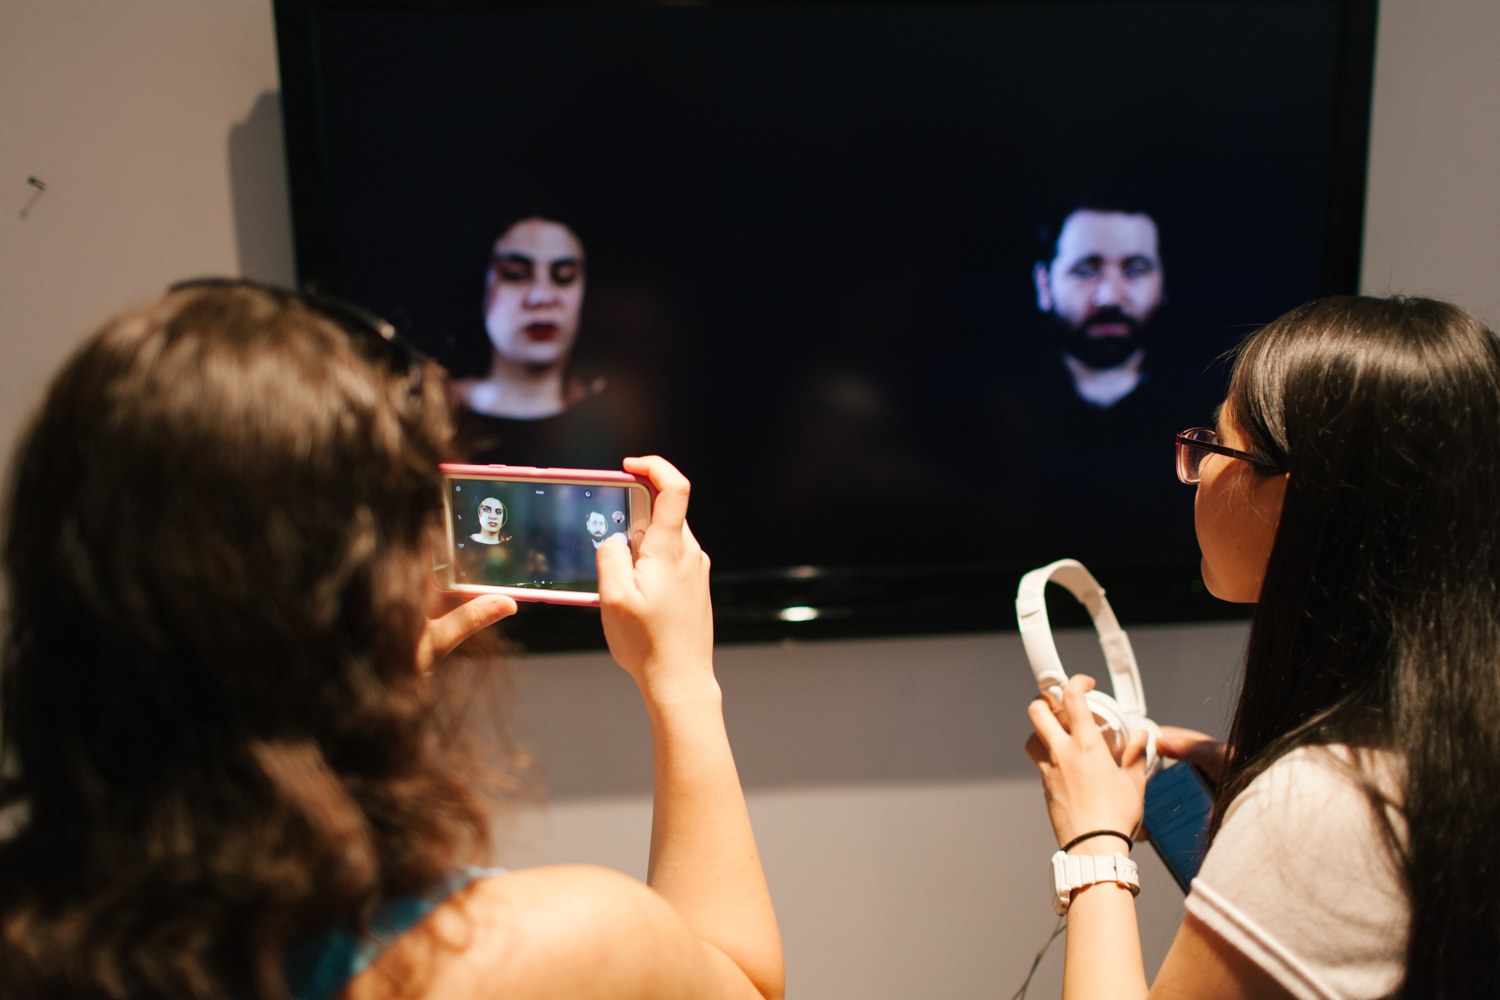 Person taking a photo of two people being displayed on a tv monitor.